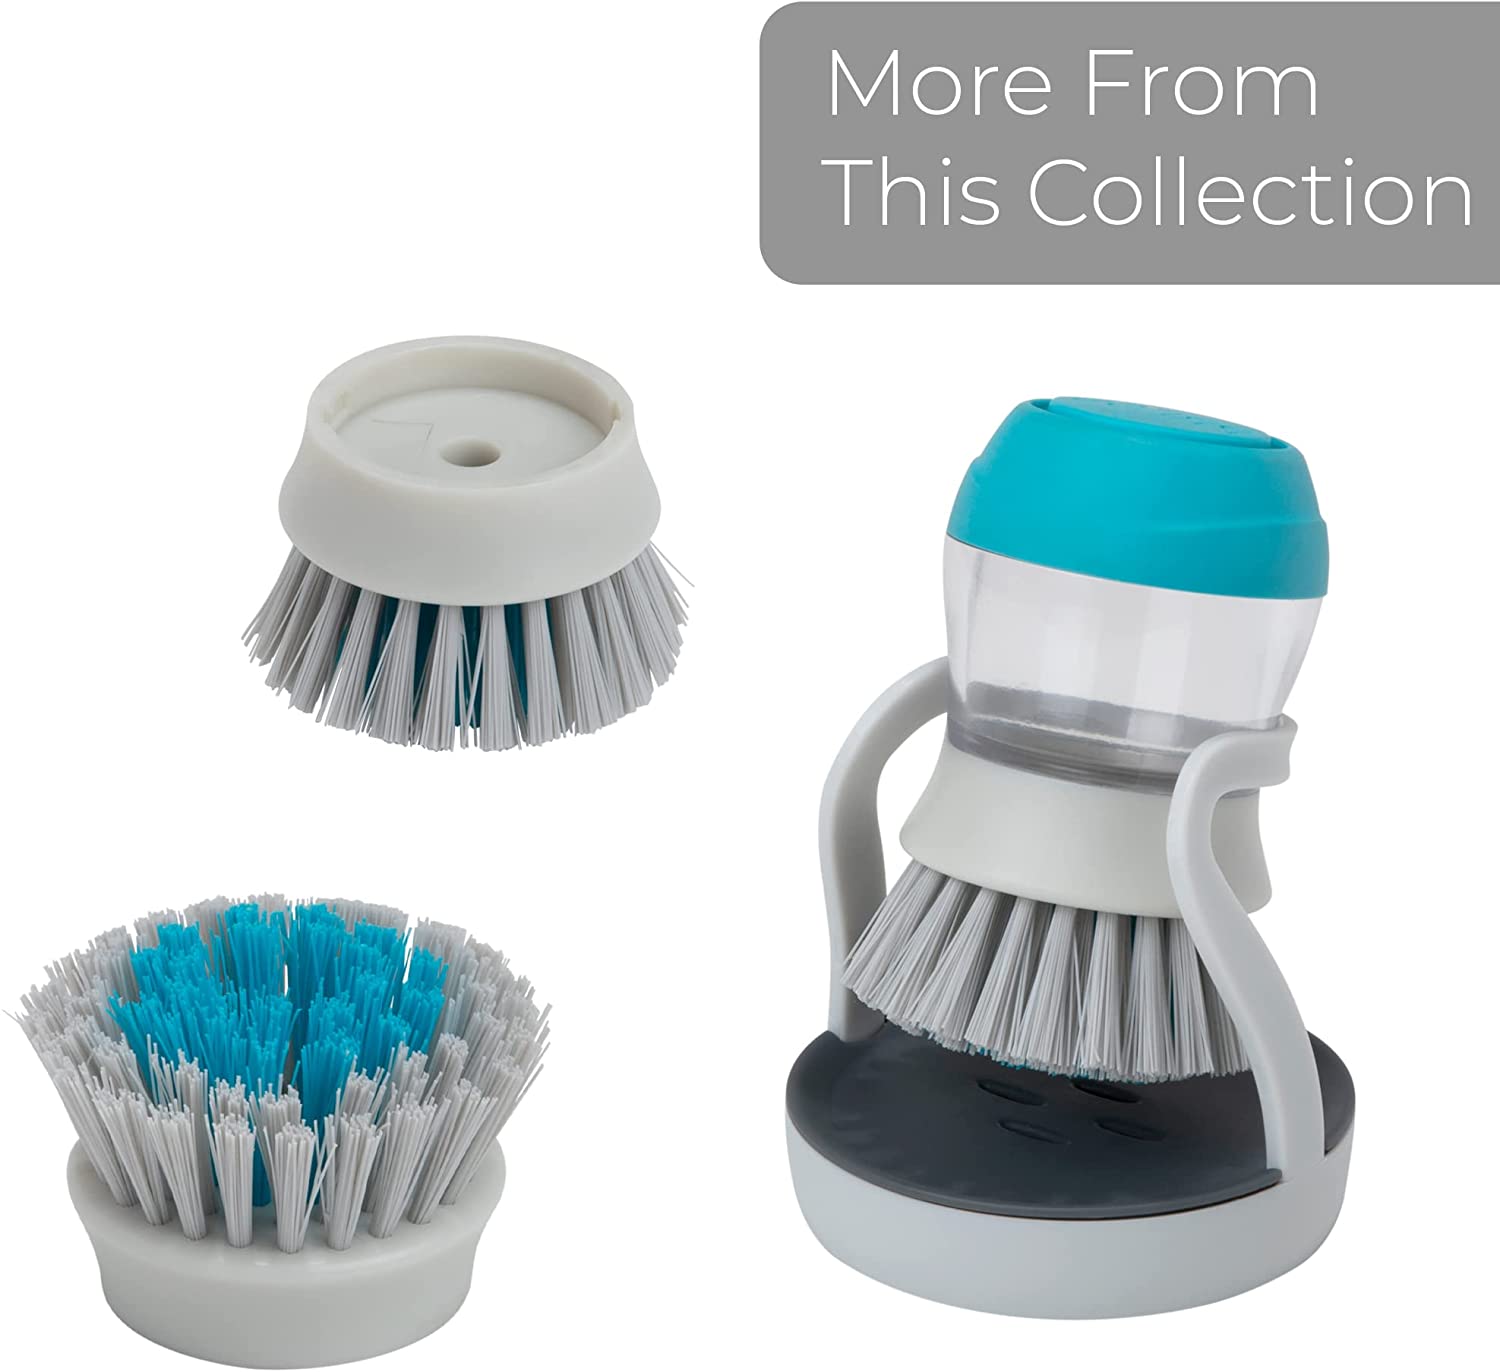 Smart Design Scrub Brush with Suction Handle - Scraper Edge - Non-Slip Handle - Non-Scratch - Long Lasting Bristles - Cleaning Pots, Pans and Sinks